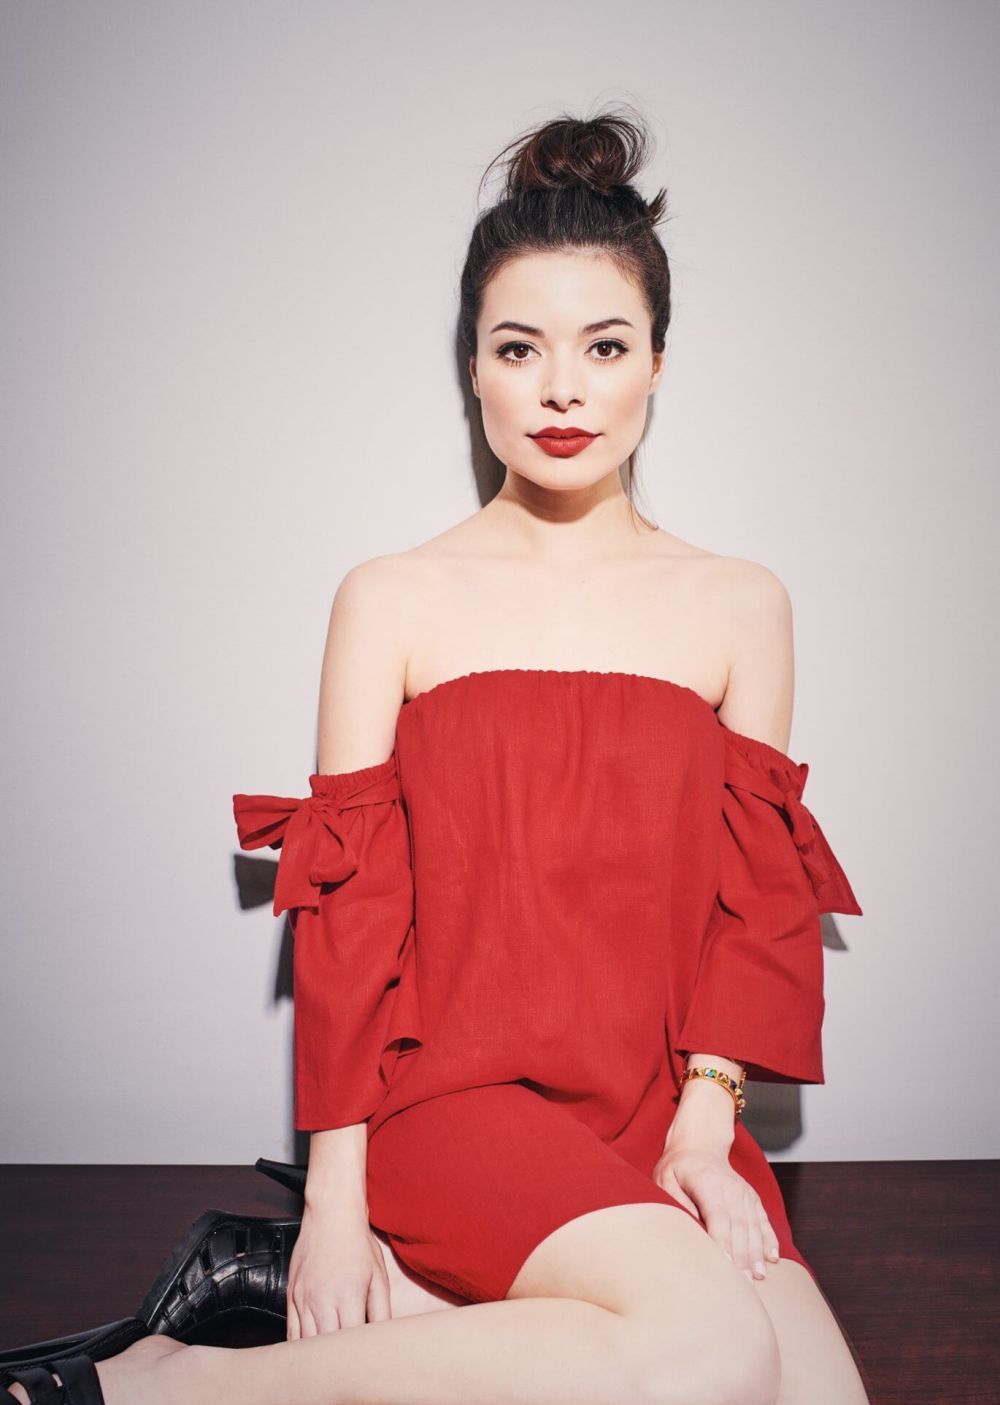 49 Miranda Cosgrove Nude Pictures Which Are Sure To Keep You Charmed With Her Charisma 4